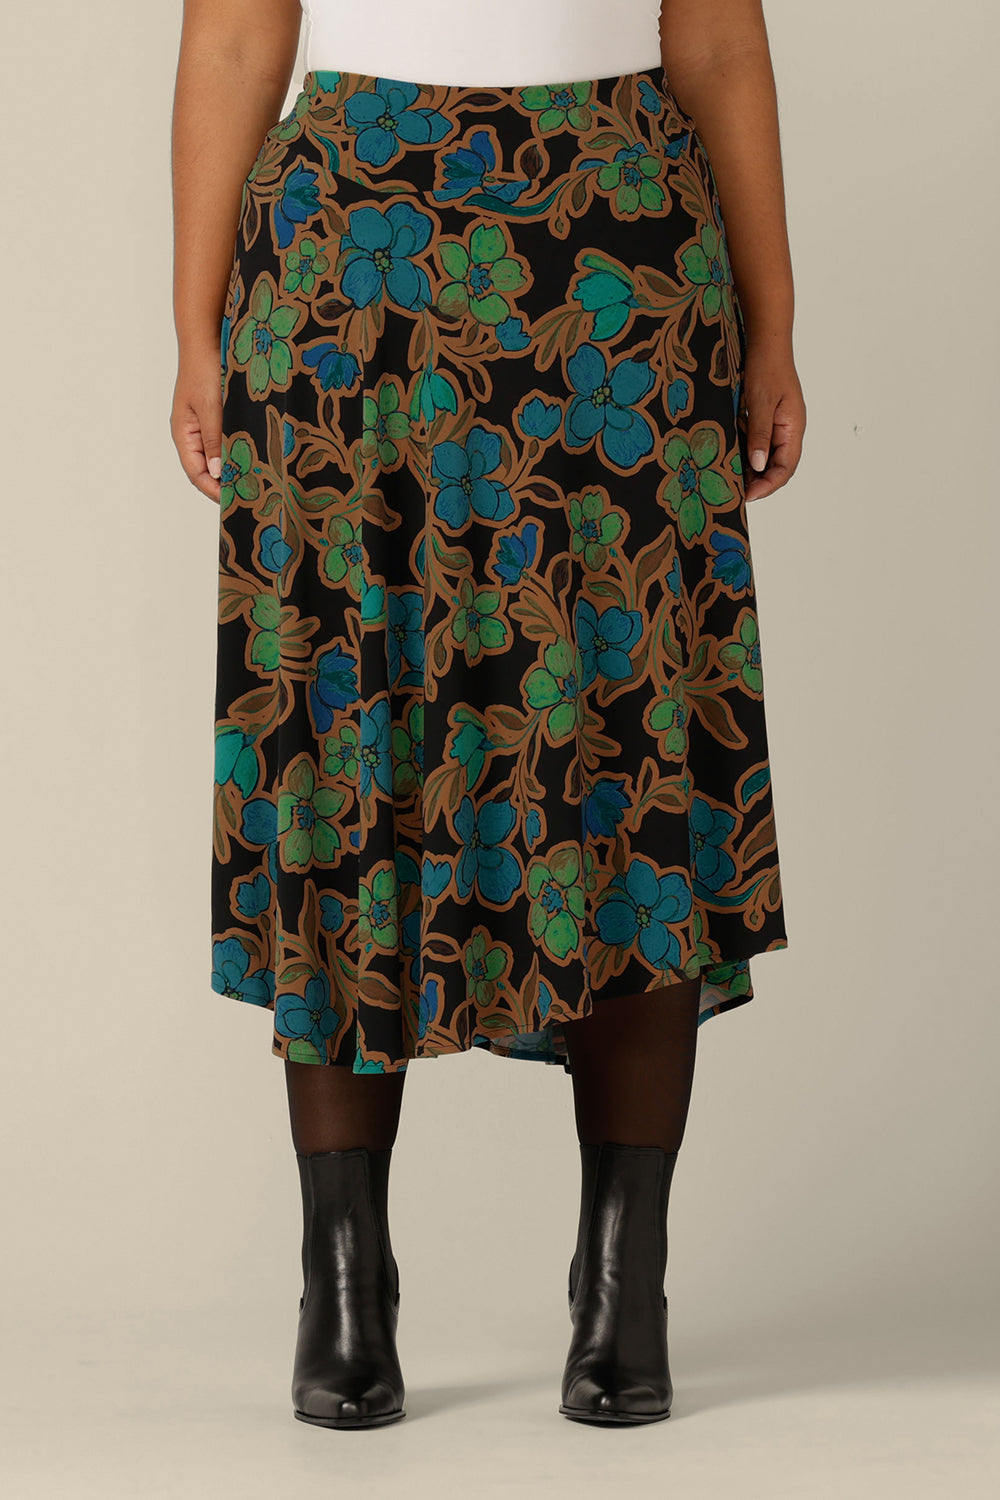 An asymmetric, midi skirt in a size 18 by Australian and New Zealand womenswear label, L&F. Australian-made, shop this jersey skirt in sizes 8 to 24.